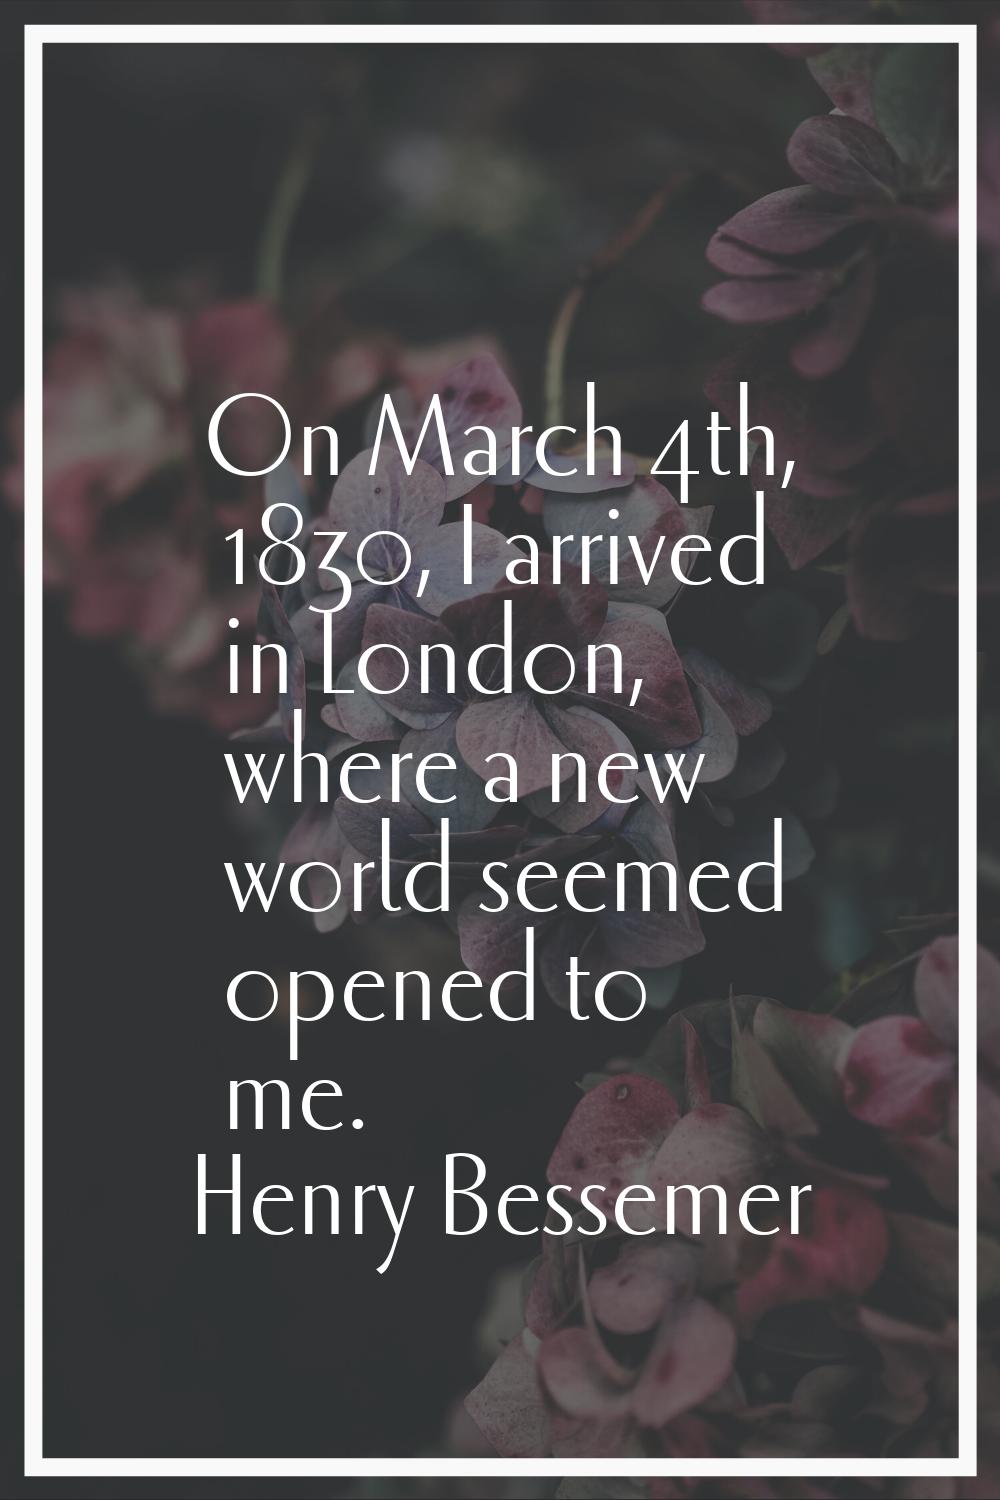 On March 4th, 1830, I arrived in London, where a new world seemed opened to me.